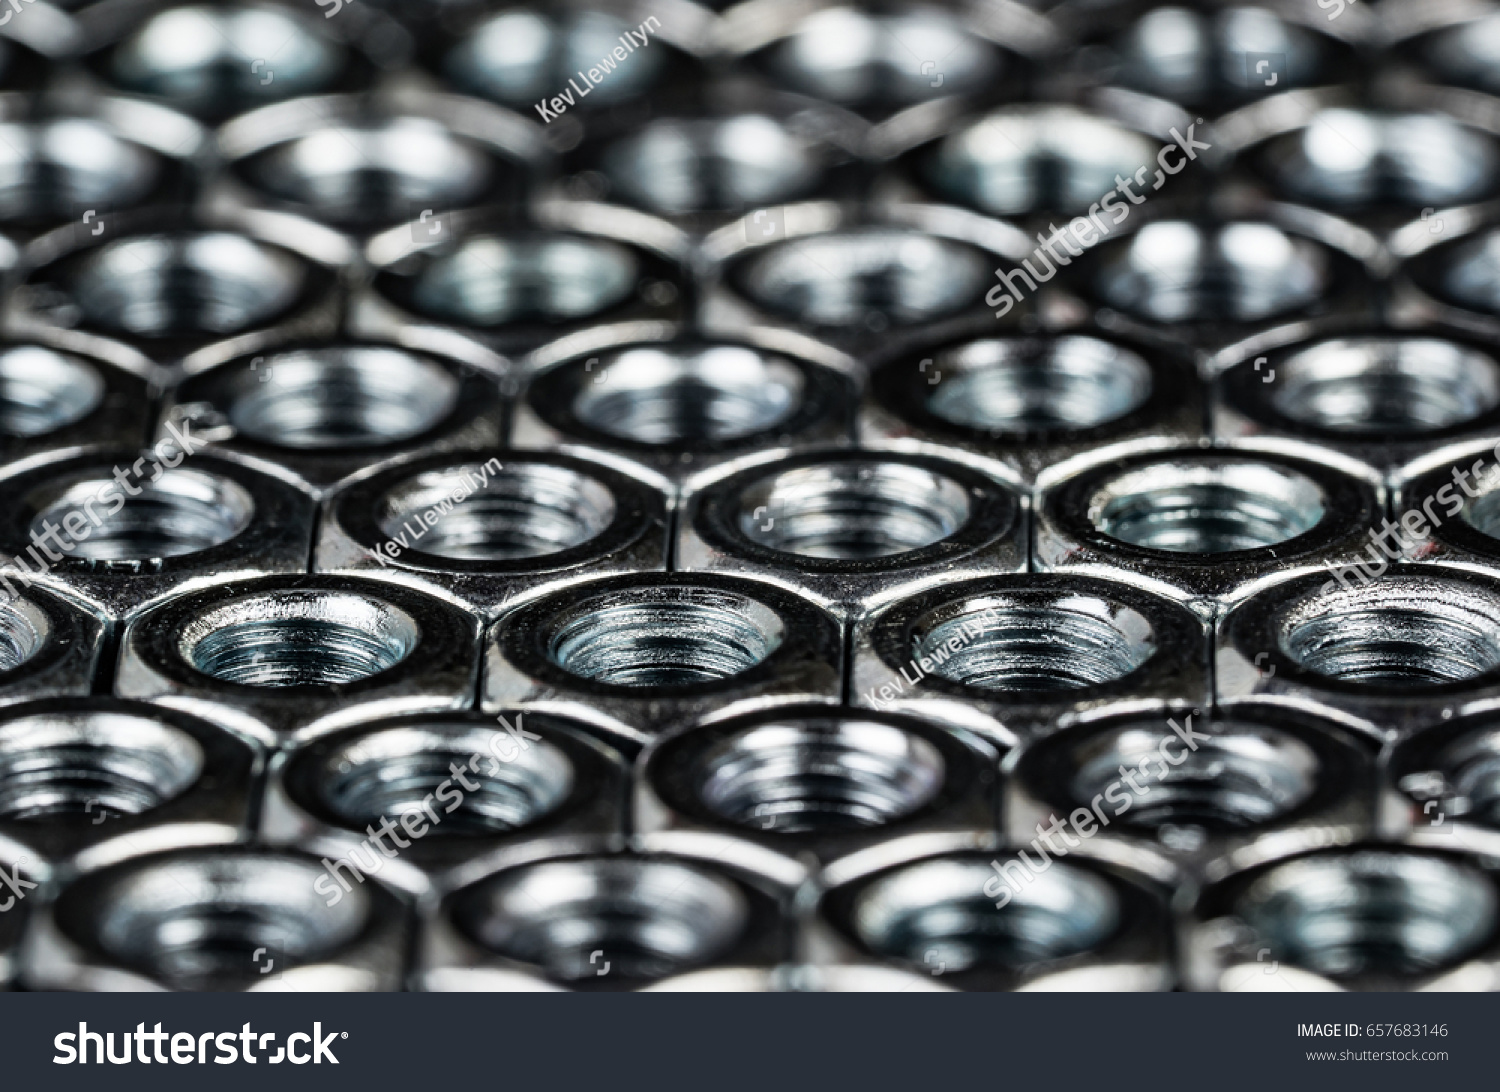 Nuts and bolts metal fasteners. Hexagon metal nuts arranges in a tessellation macro, with dramatic lighting to illustrate engineering or construction expertise. #657683146